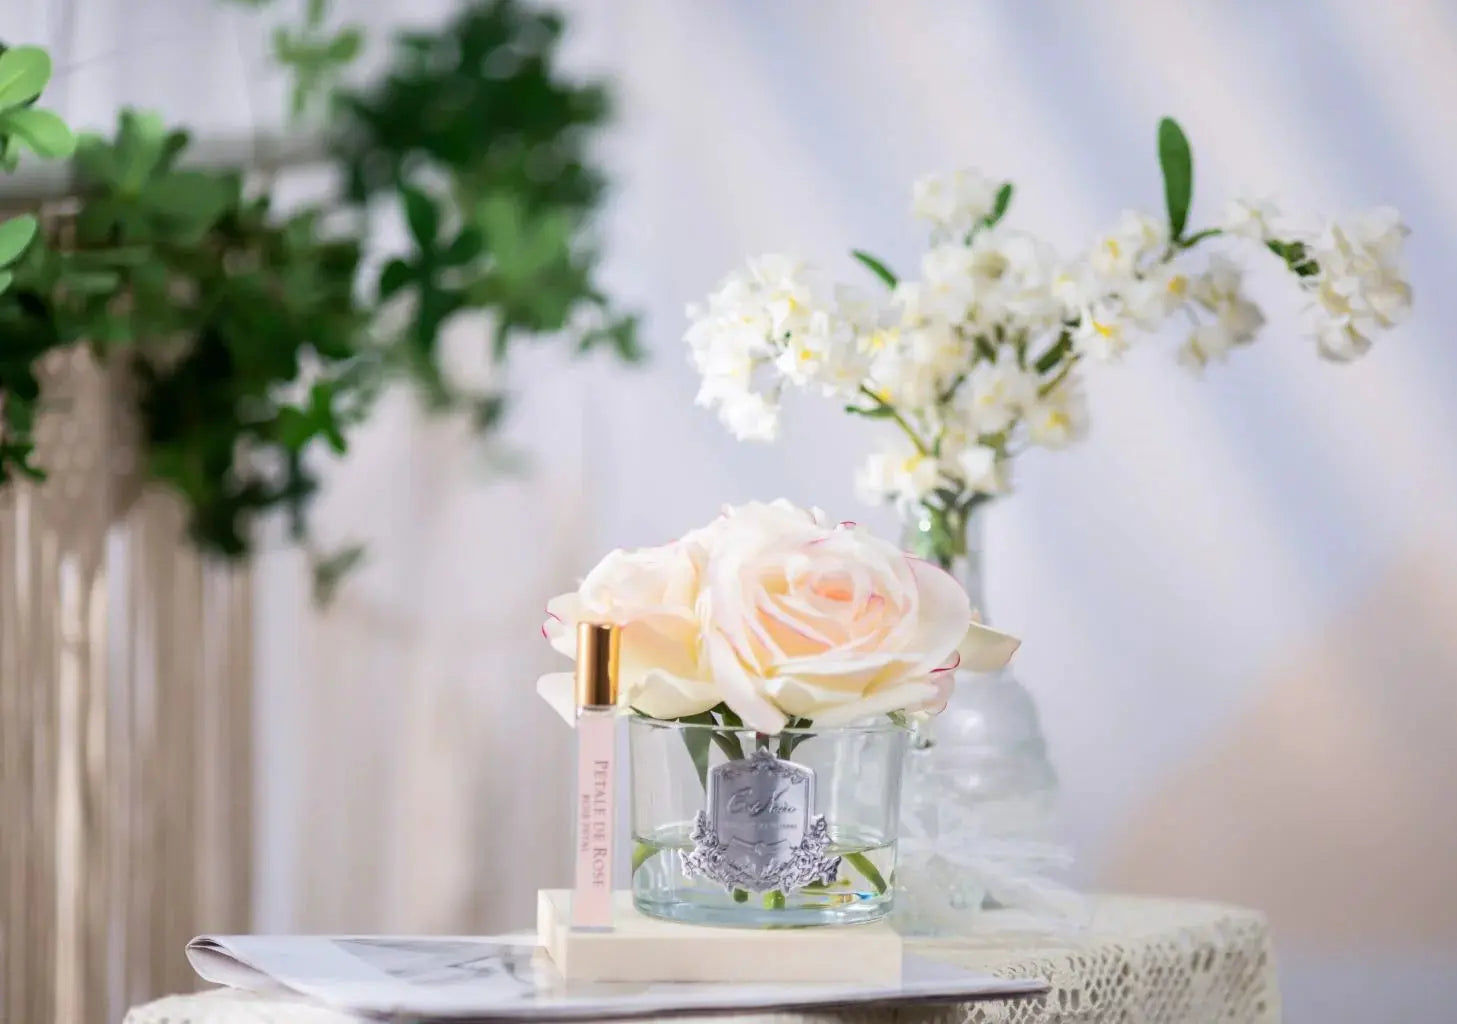 A Cote Noire product featuring five artificial pink blush roses in a clear glass vase with a silver crest, accompanied by a small vial of perfume labeled 'Pétale de Rose' with a gold cap. The items are displayed on a lace surface with a background of greenery and a vase of white flowers, creating a delicate and elegant setting.